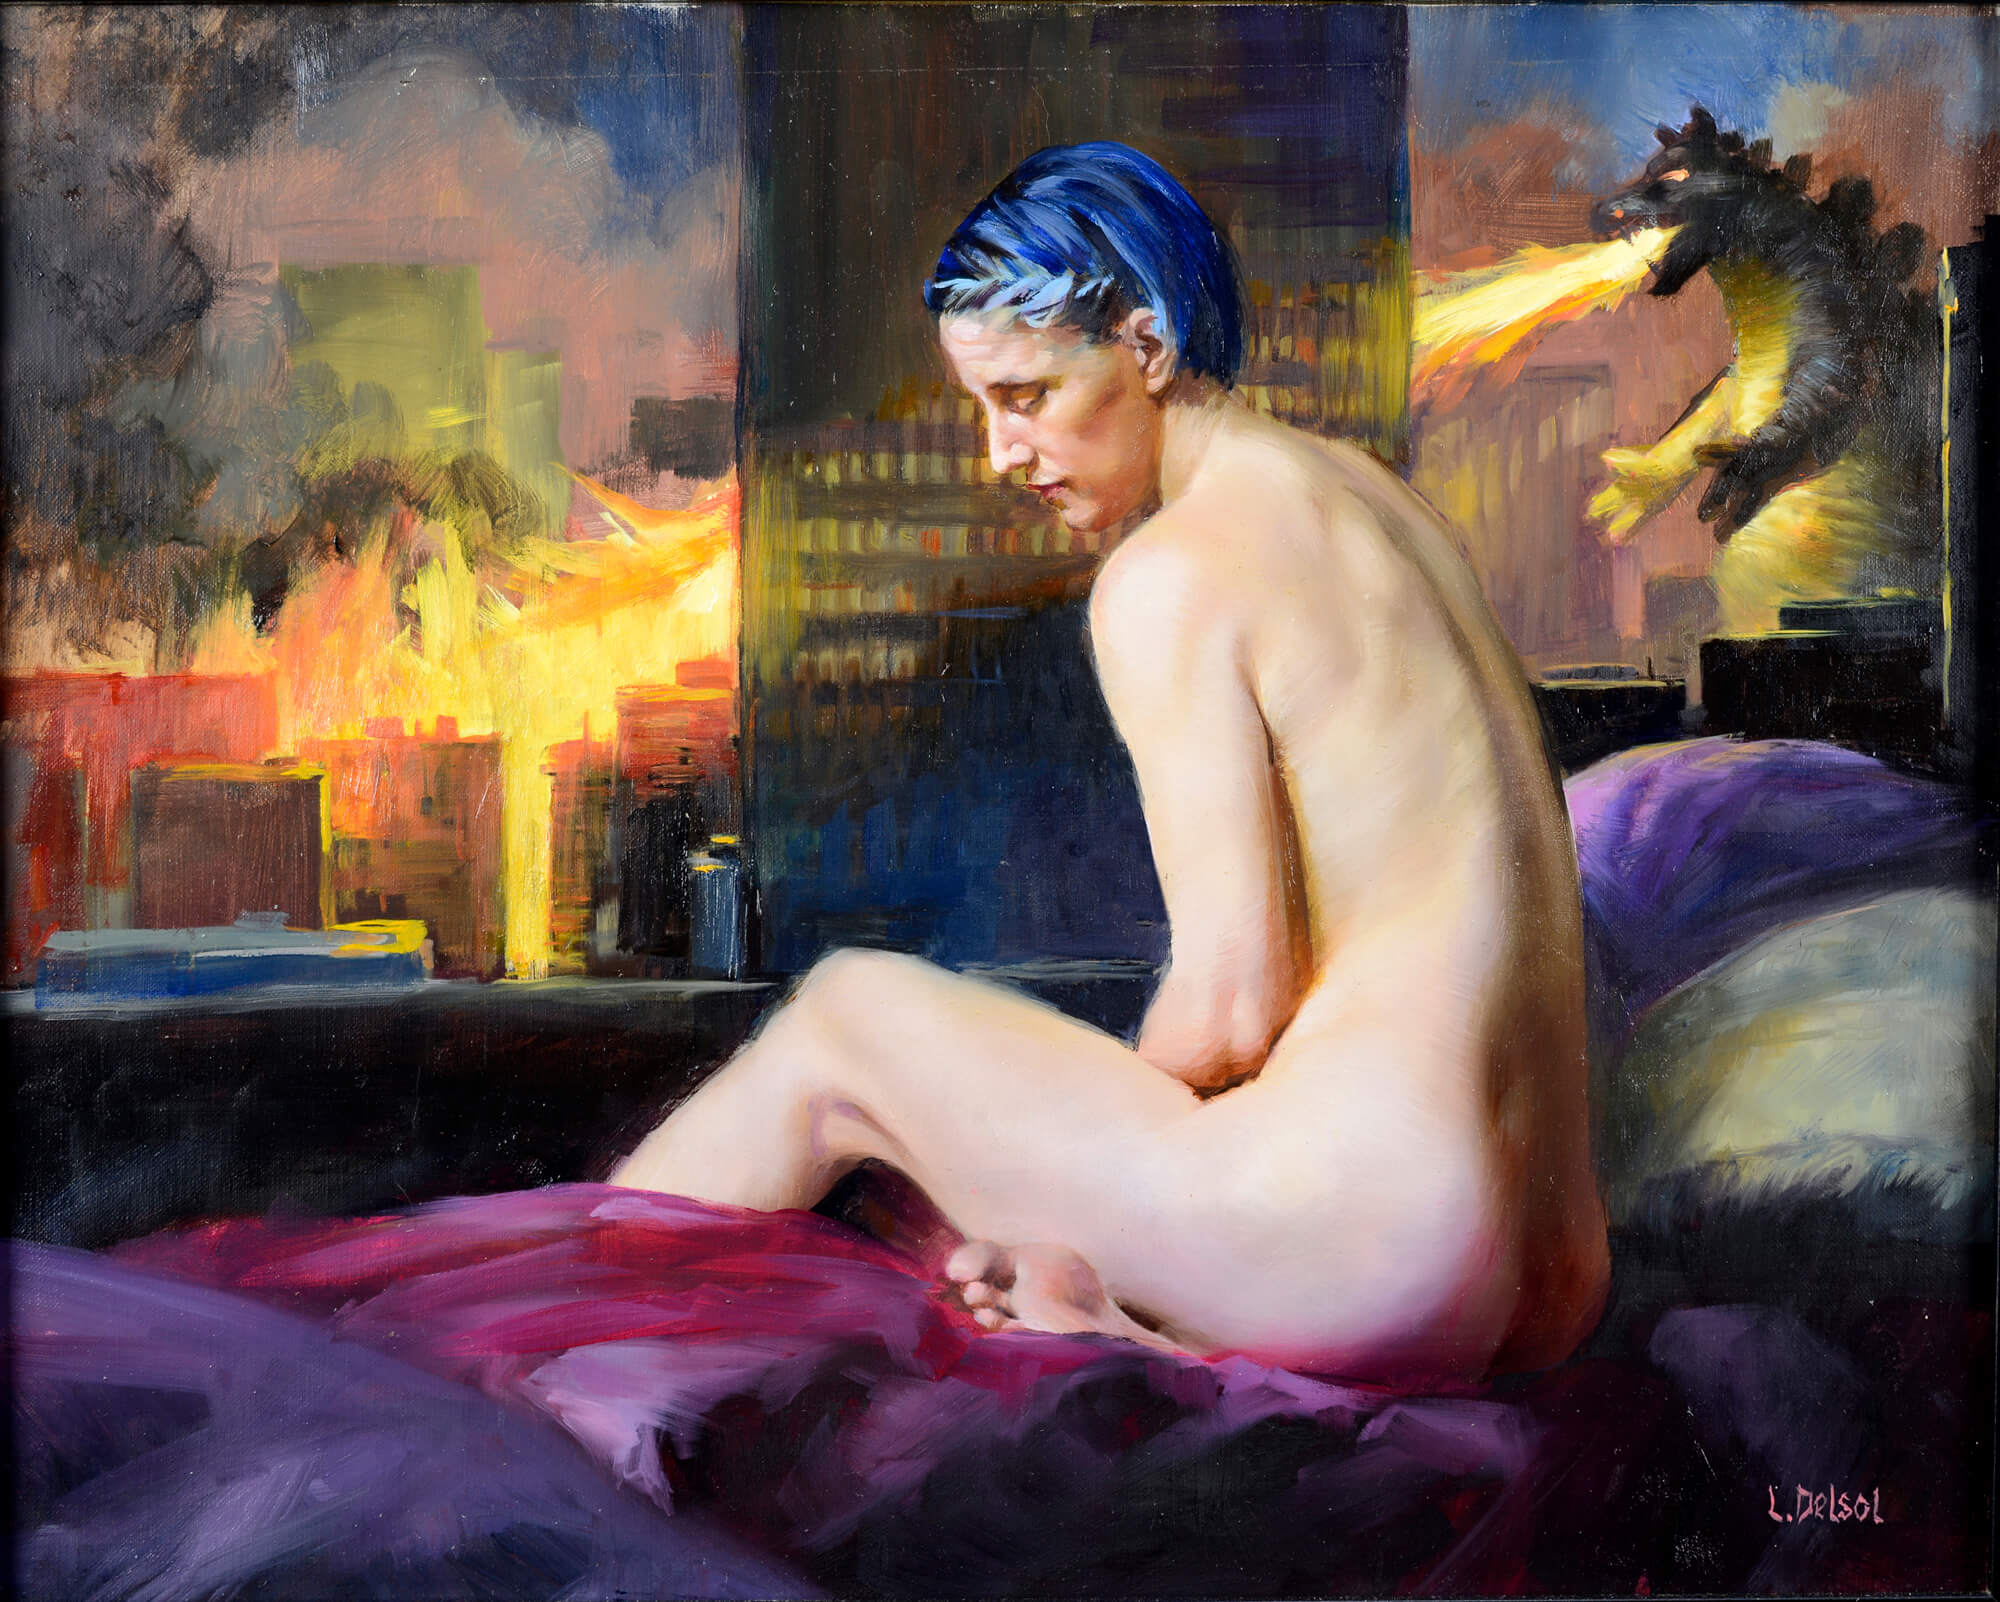 Figurative oil painting of a nude woman with blue hair contemplating her fate with burning city and godzilla-like creature in the background